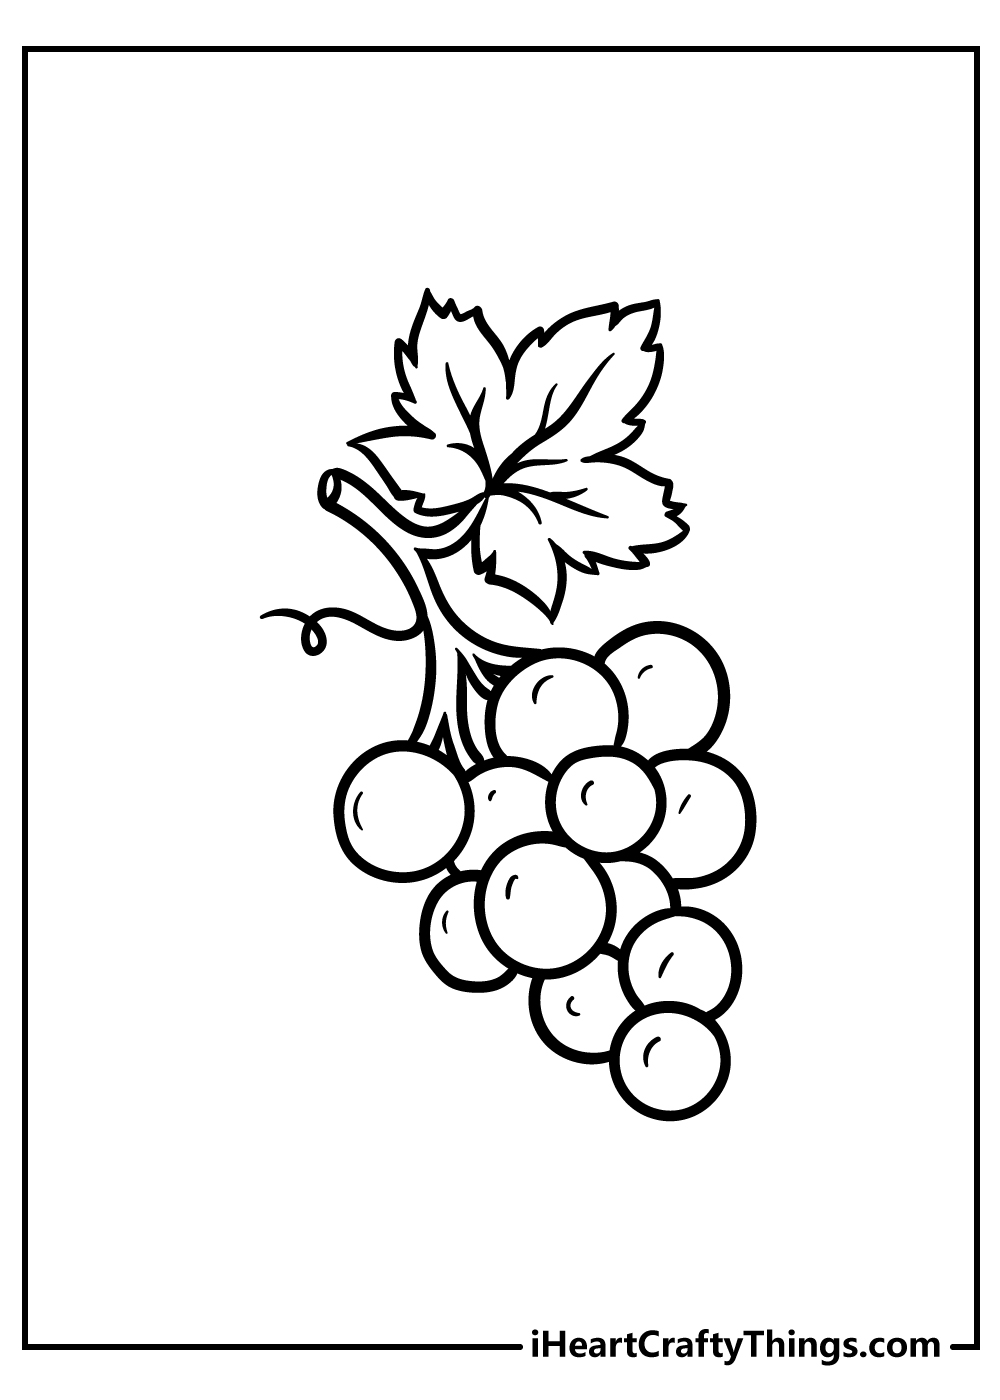 Fruit Coloring Pages for adults free printable